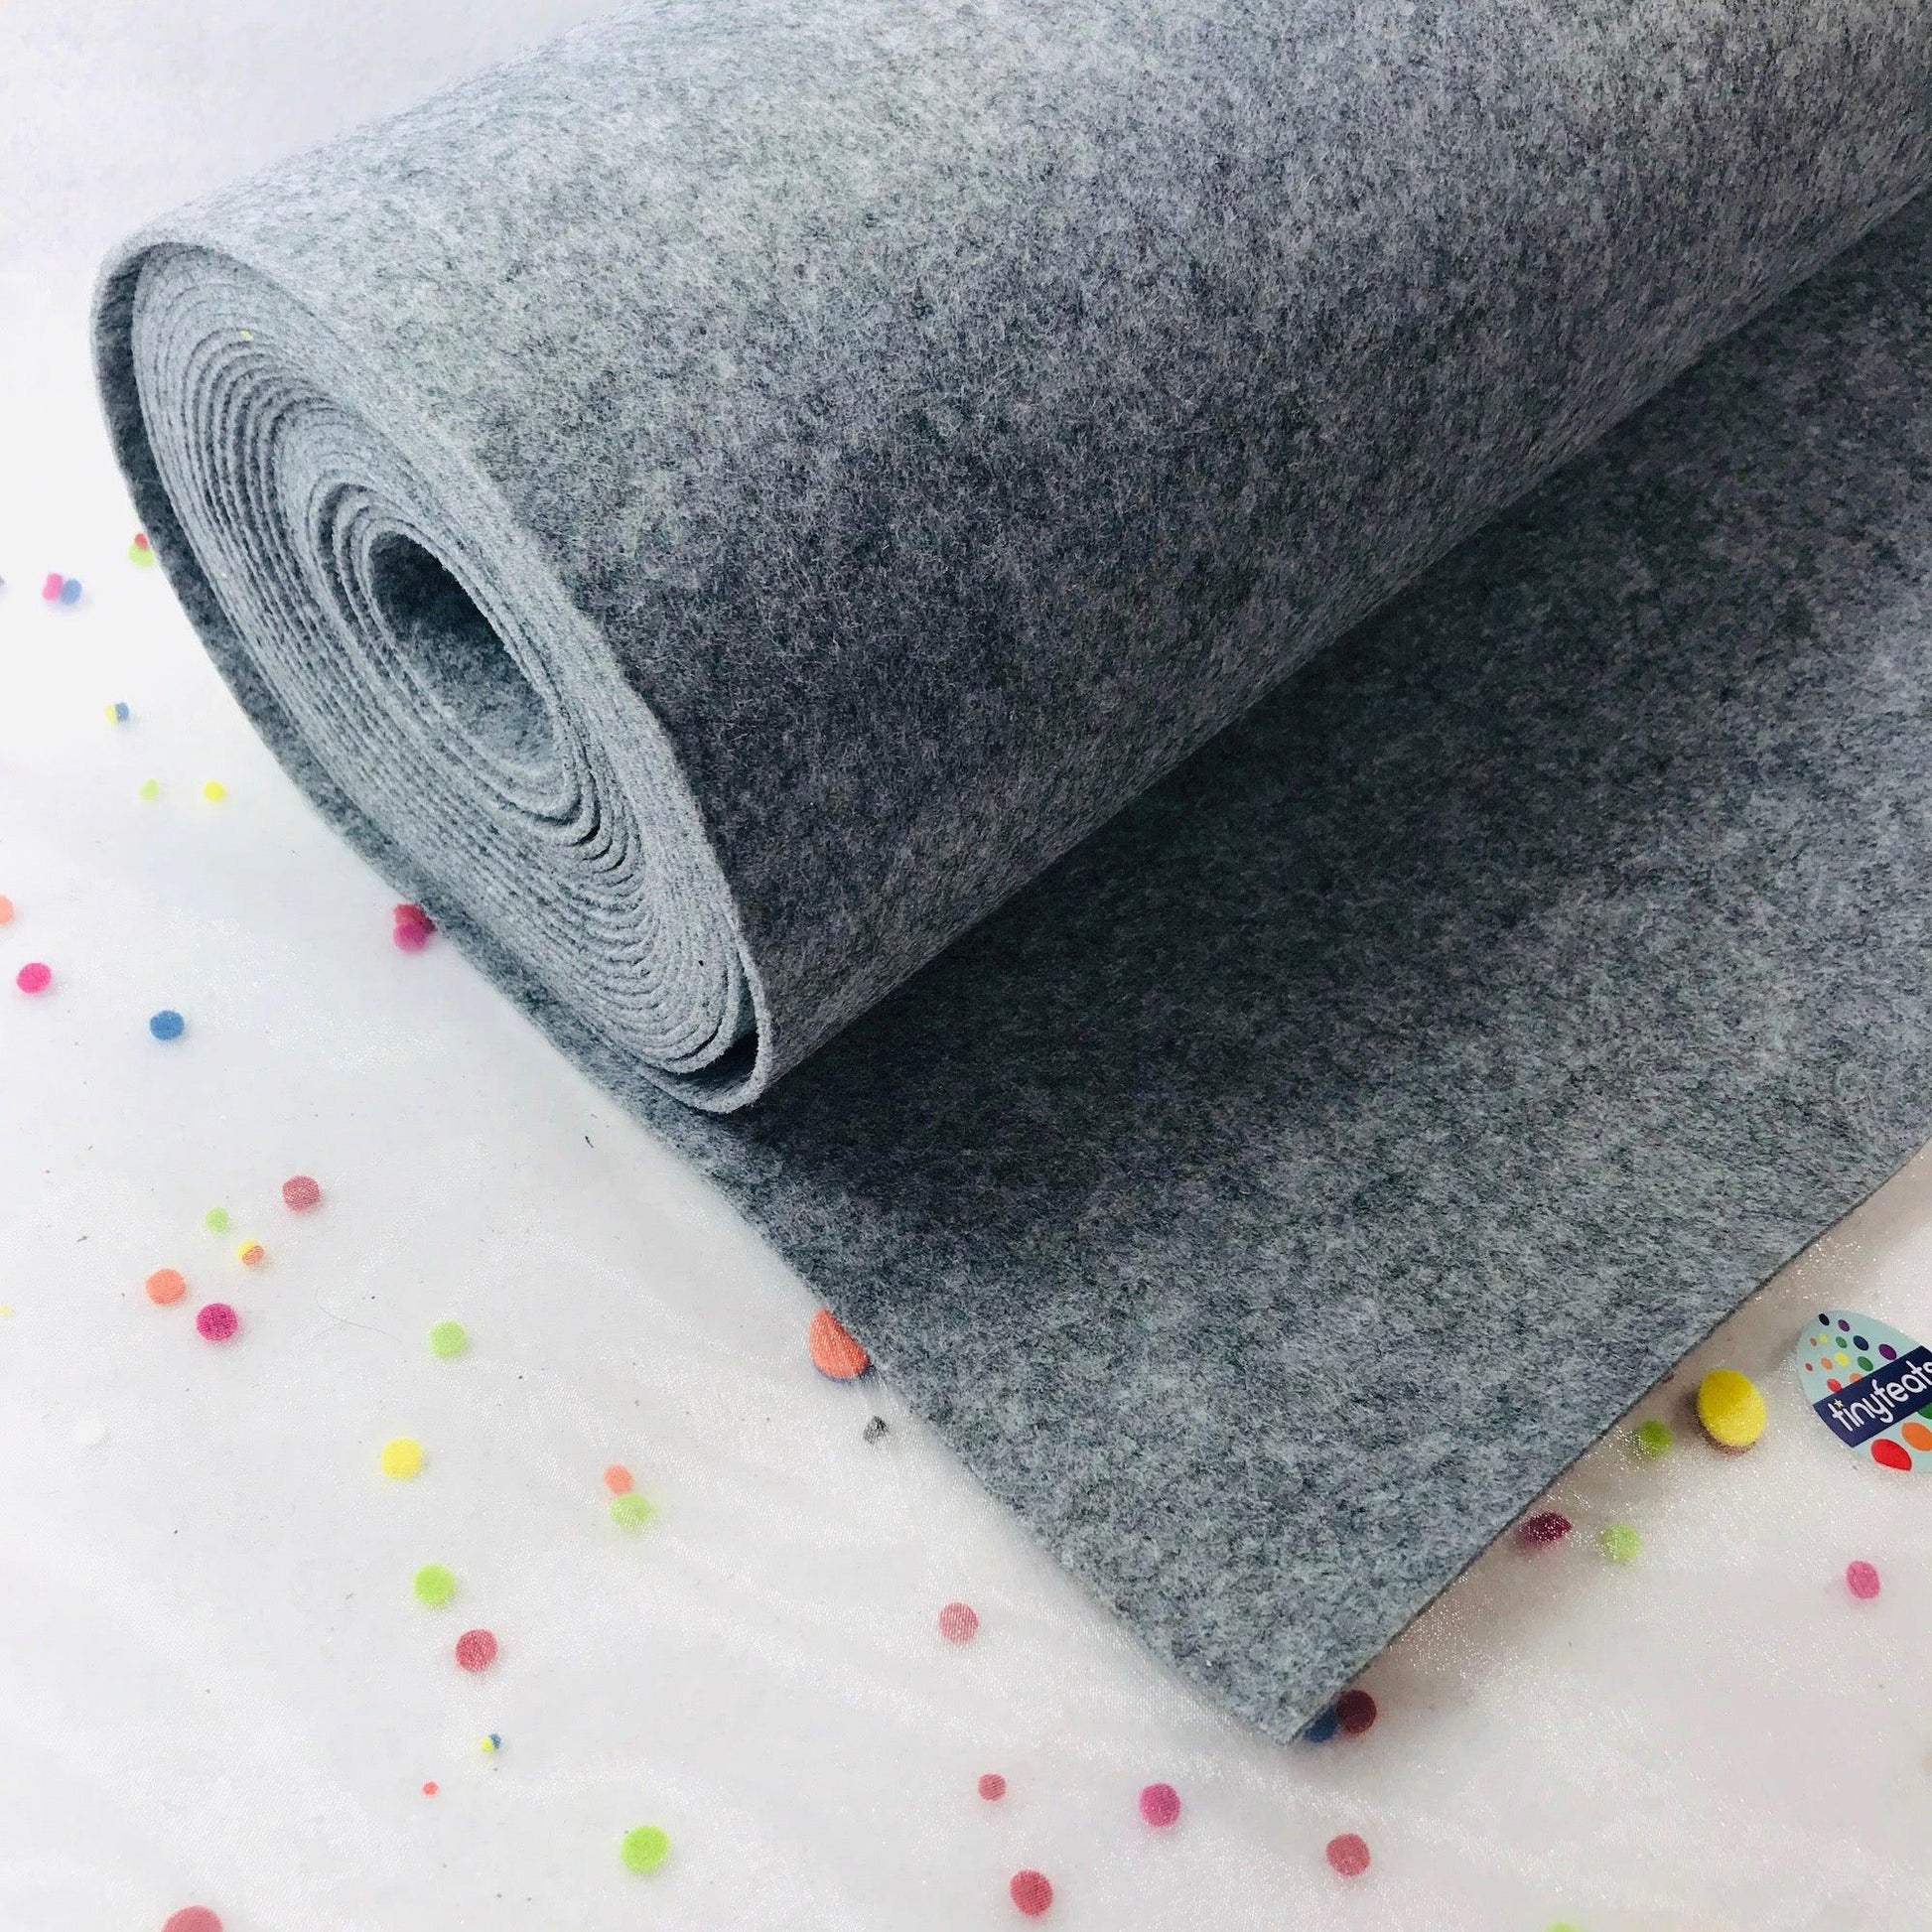 3mm Thick Felt by the Yard - LIGHT GREY HEATHERED Mid Weight Felt - 100% Polyester Non Woven Fabric - tinyfeats